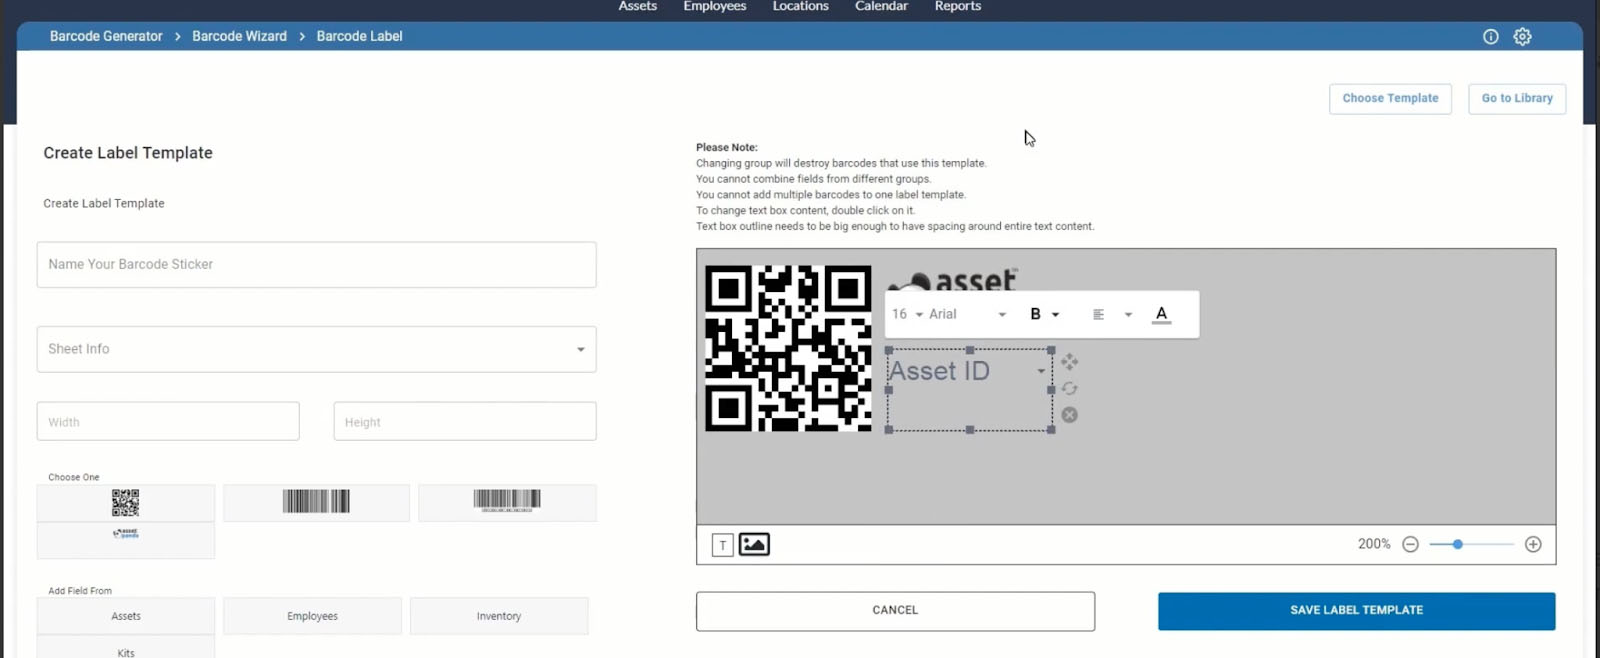 Image showing how to design and create custom barcode templates.